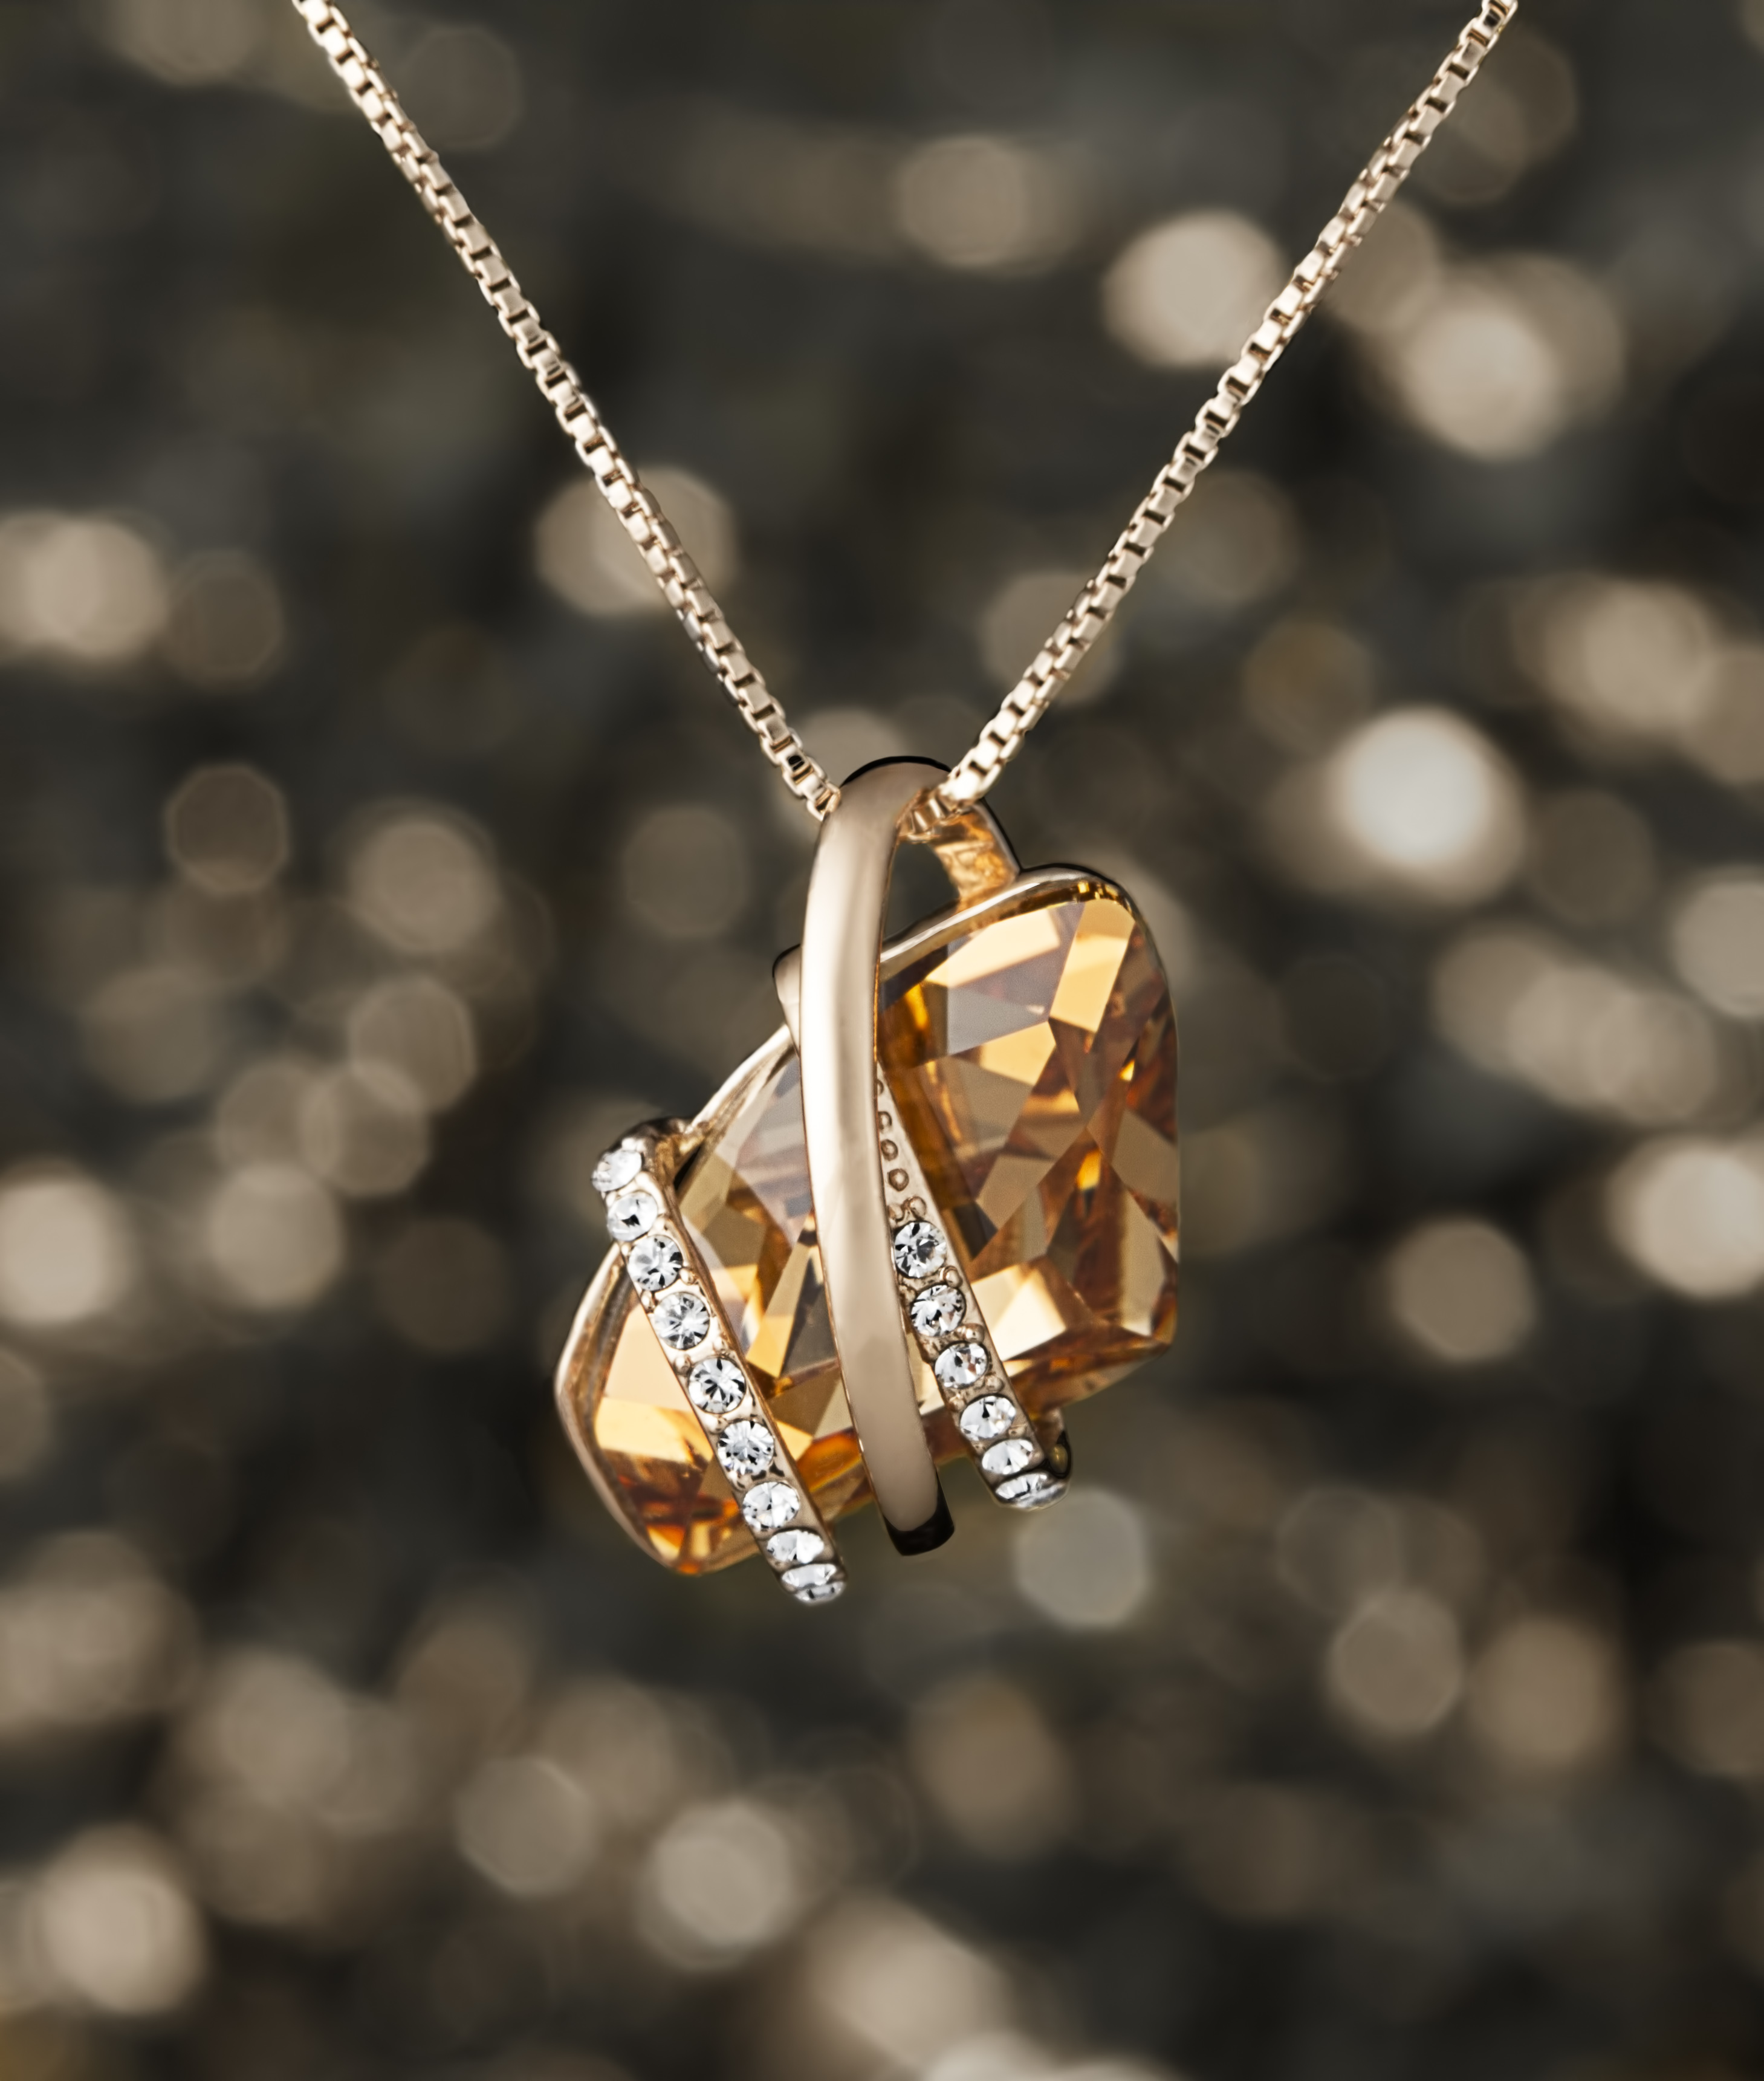 Jewelry Photography: Golden Pendant Shot Submission 3